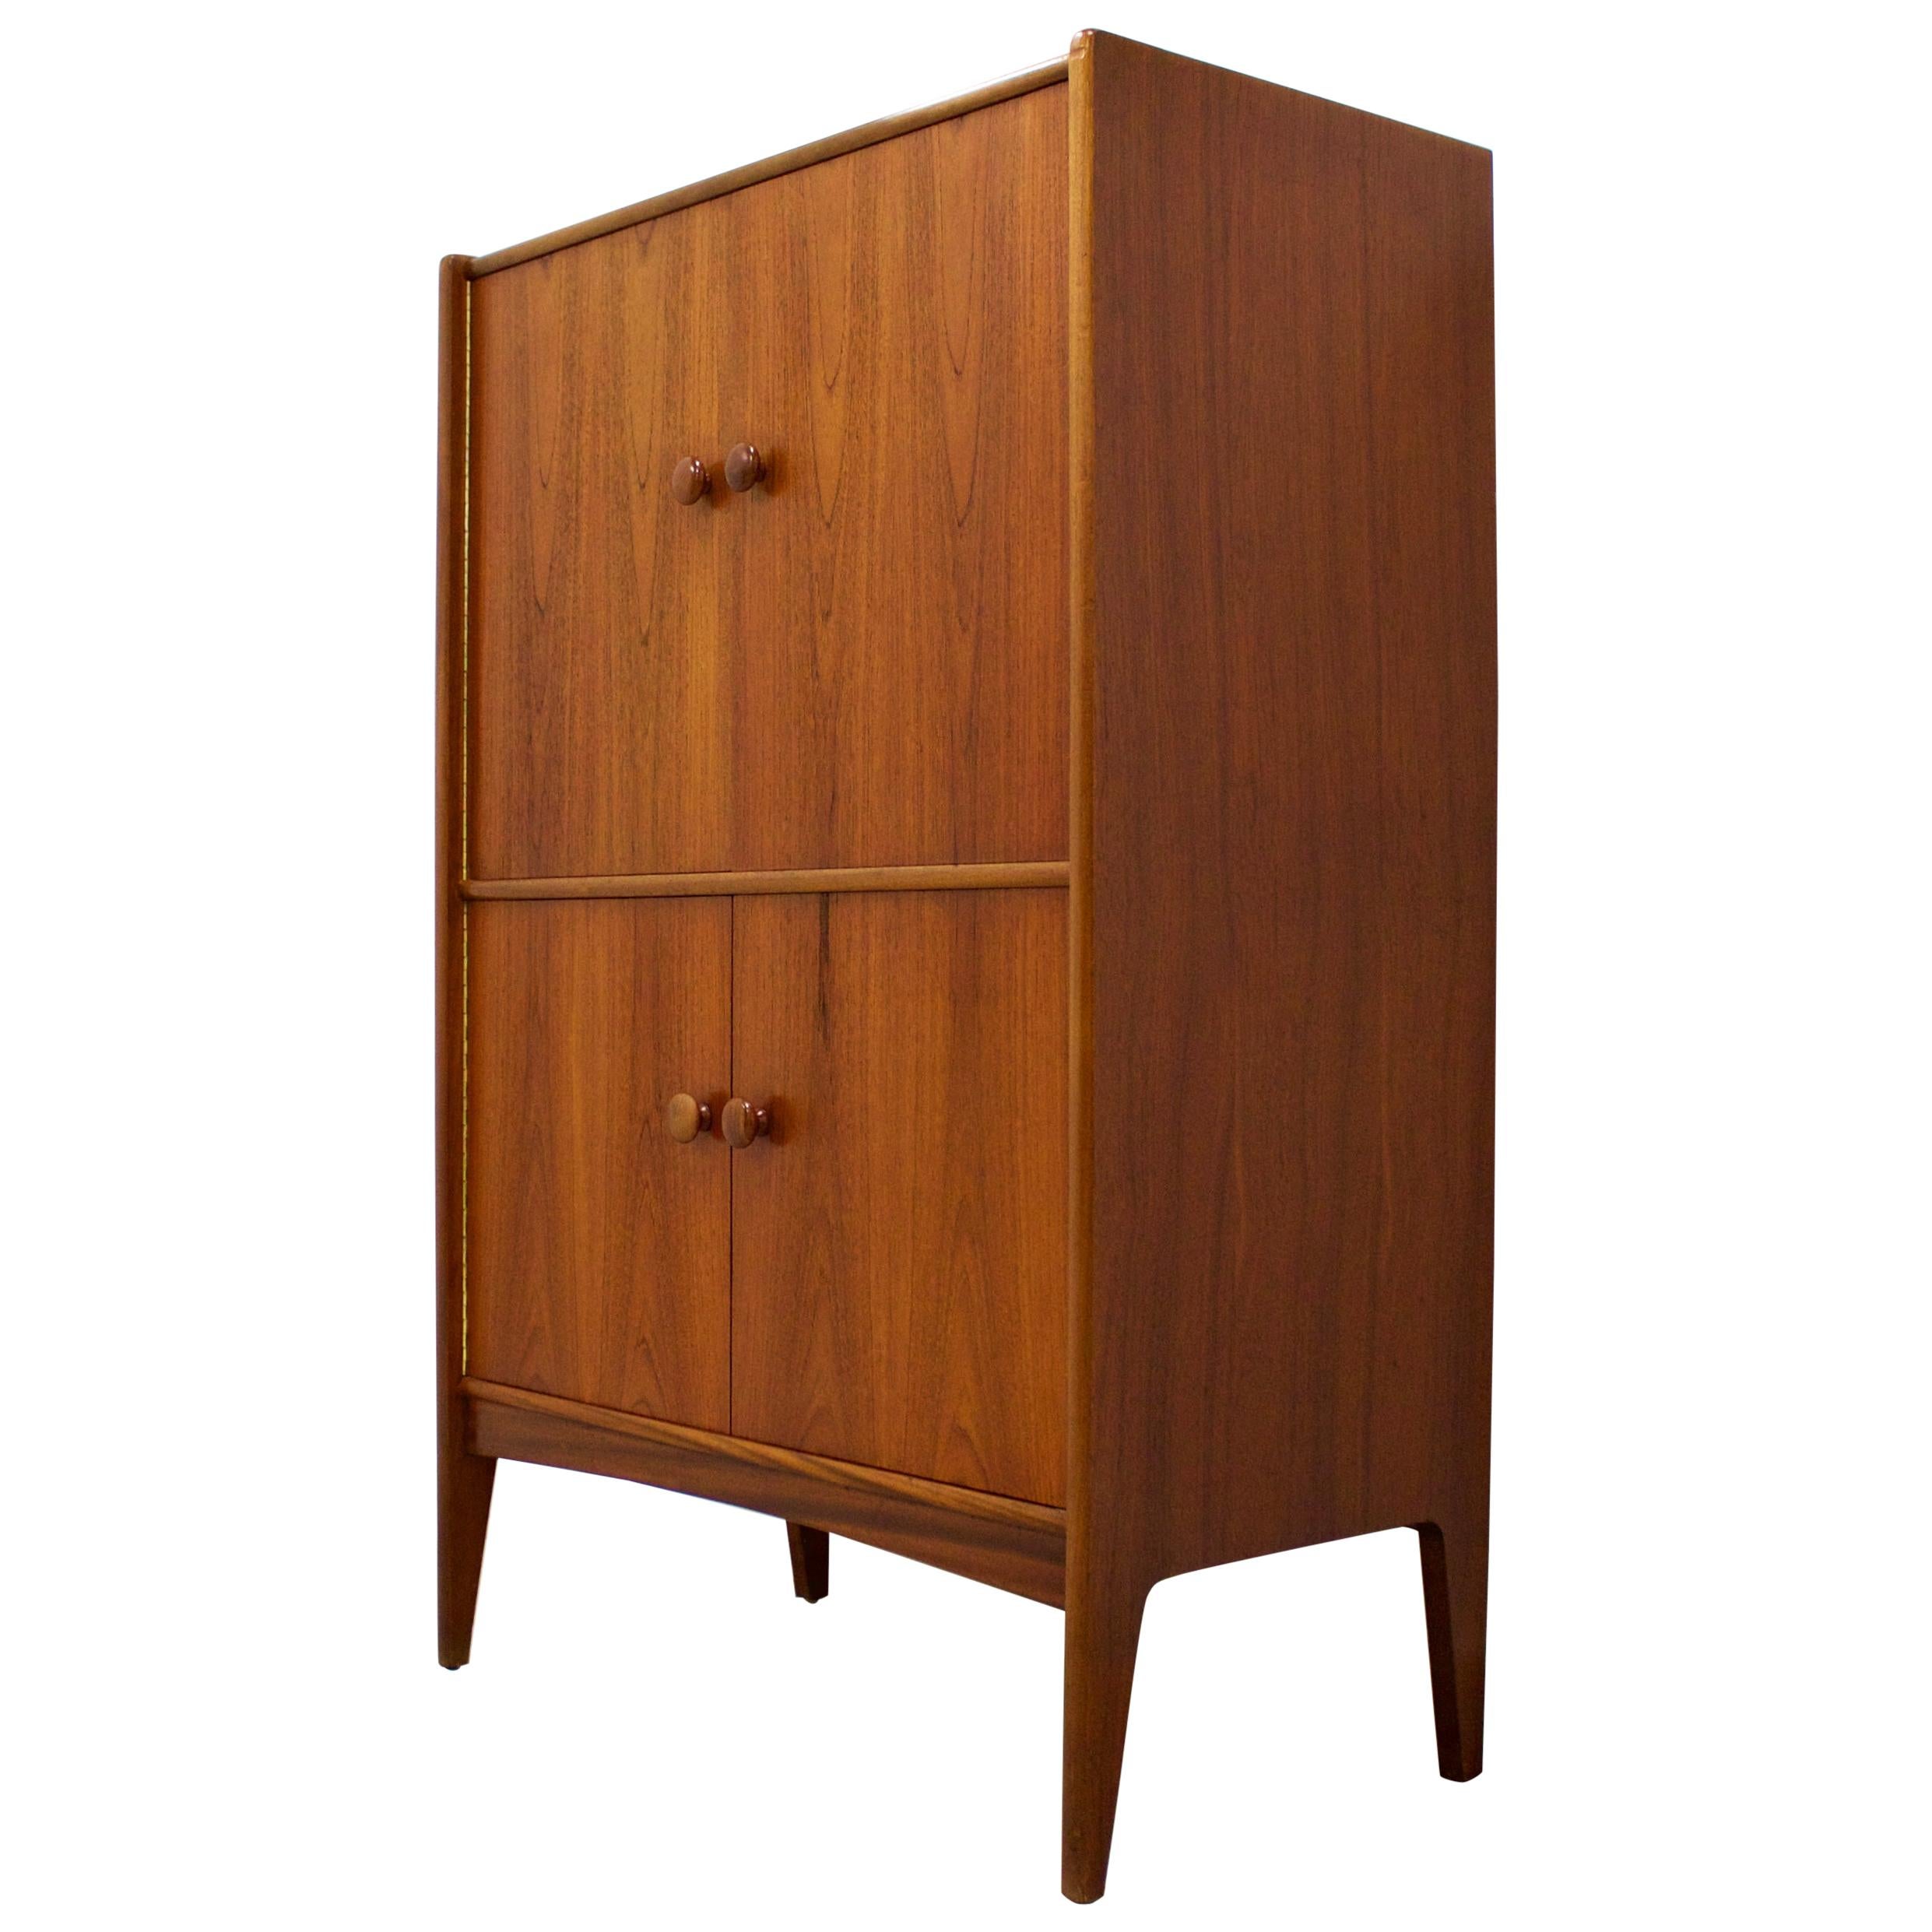 Midcentury design

- Midcentury drinks cabinet / dry bar / sideboard
- Manufactured in the UK by Younger
- Made from teak and teak veneer.